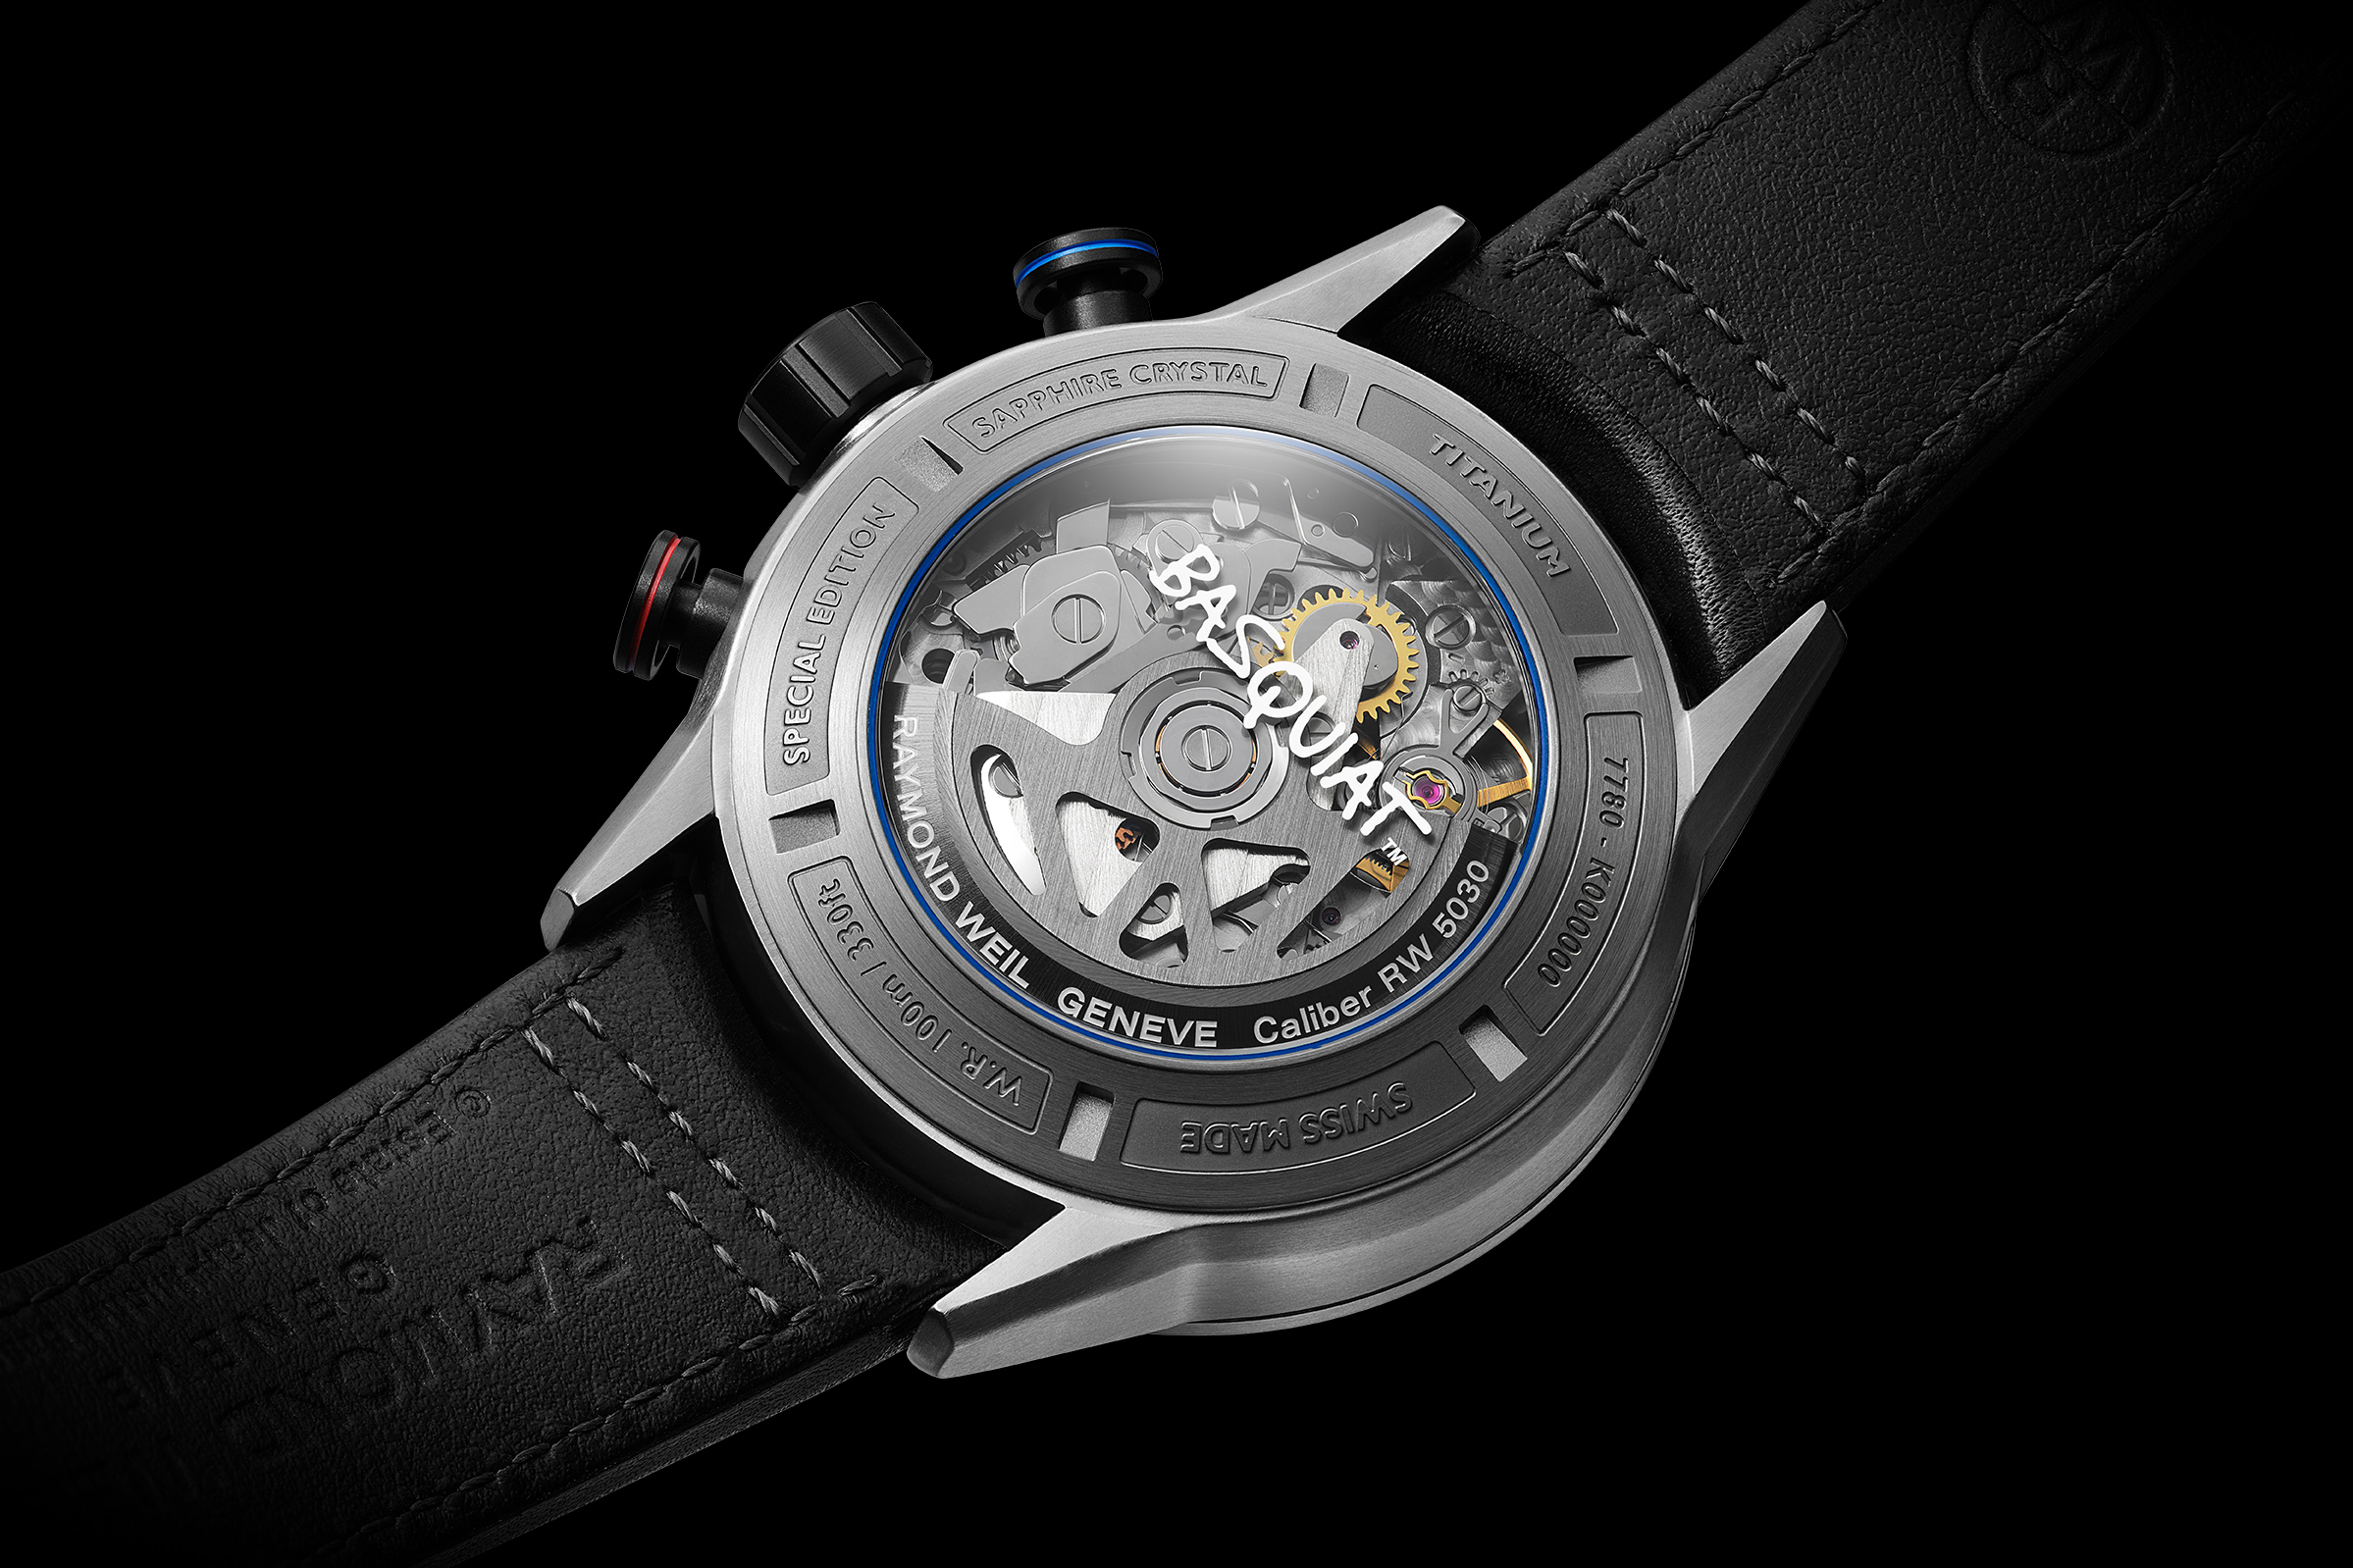 RAYMOND WEIL PAYS TRIBUTE TO BASQUIAT™ WITH A SPECIAL EDITION TIMEPIECE